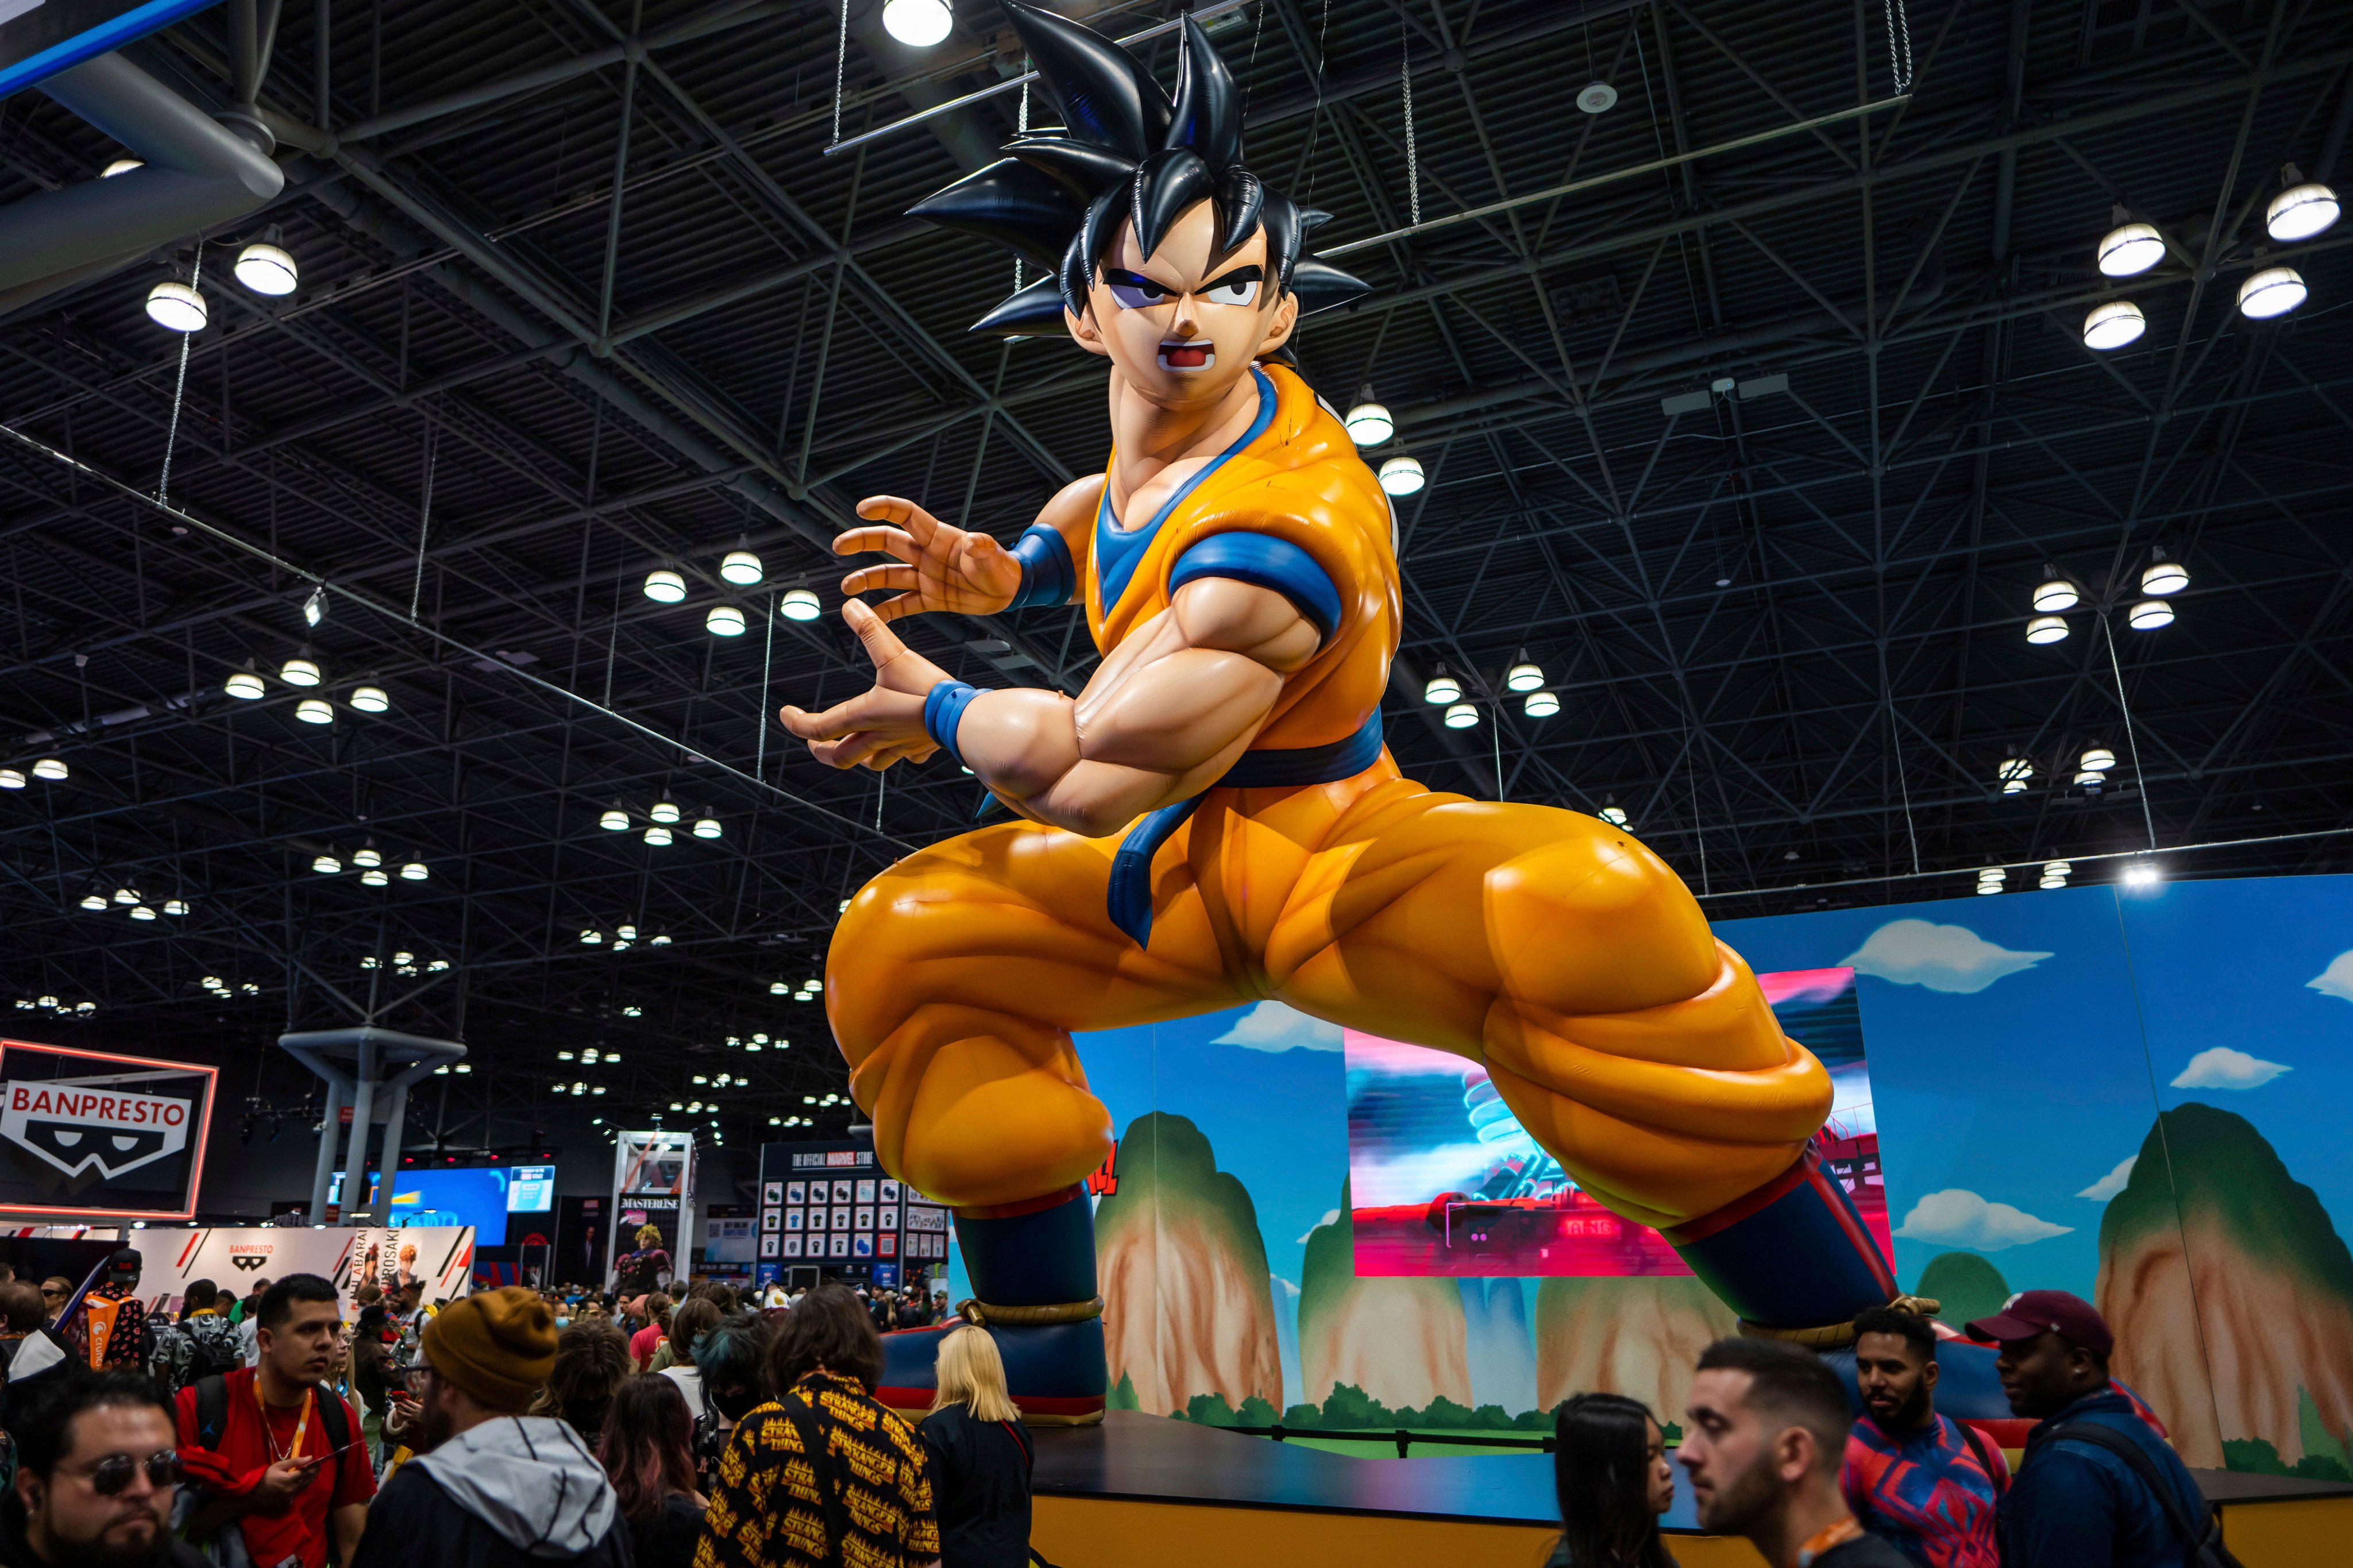 A Dragon Ball Z booth is seen during New York Comic Con in 2023. Akira Toriyama, the creator of one of Japan’s best-selling “Dragon Ball” and other popular anime who influenced Japanese comics, has died. He was 68. Photo: Charles Sykes/Invision/AP